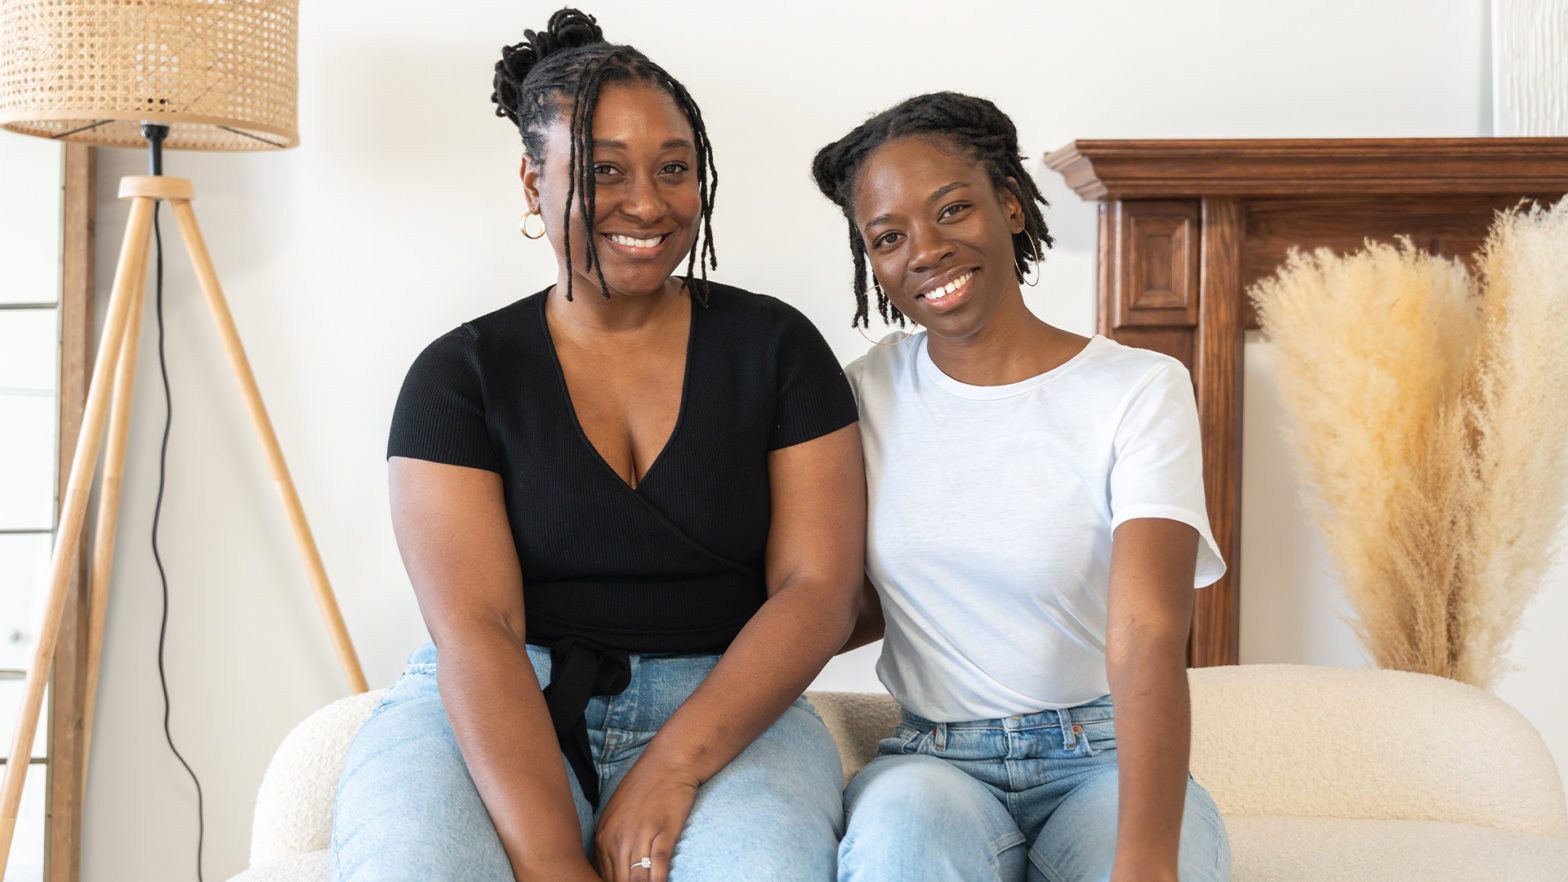 Co-Workers Turned Co-Founders Built A Healing Ground For Women Of Color Through Their Wellness Platform The Villij